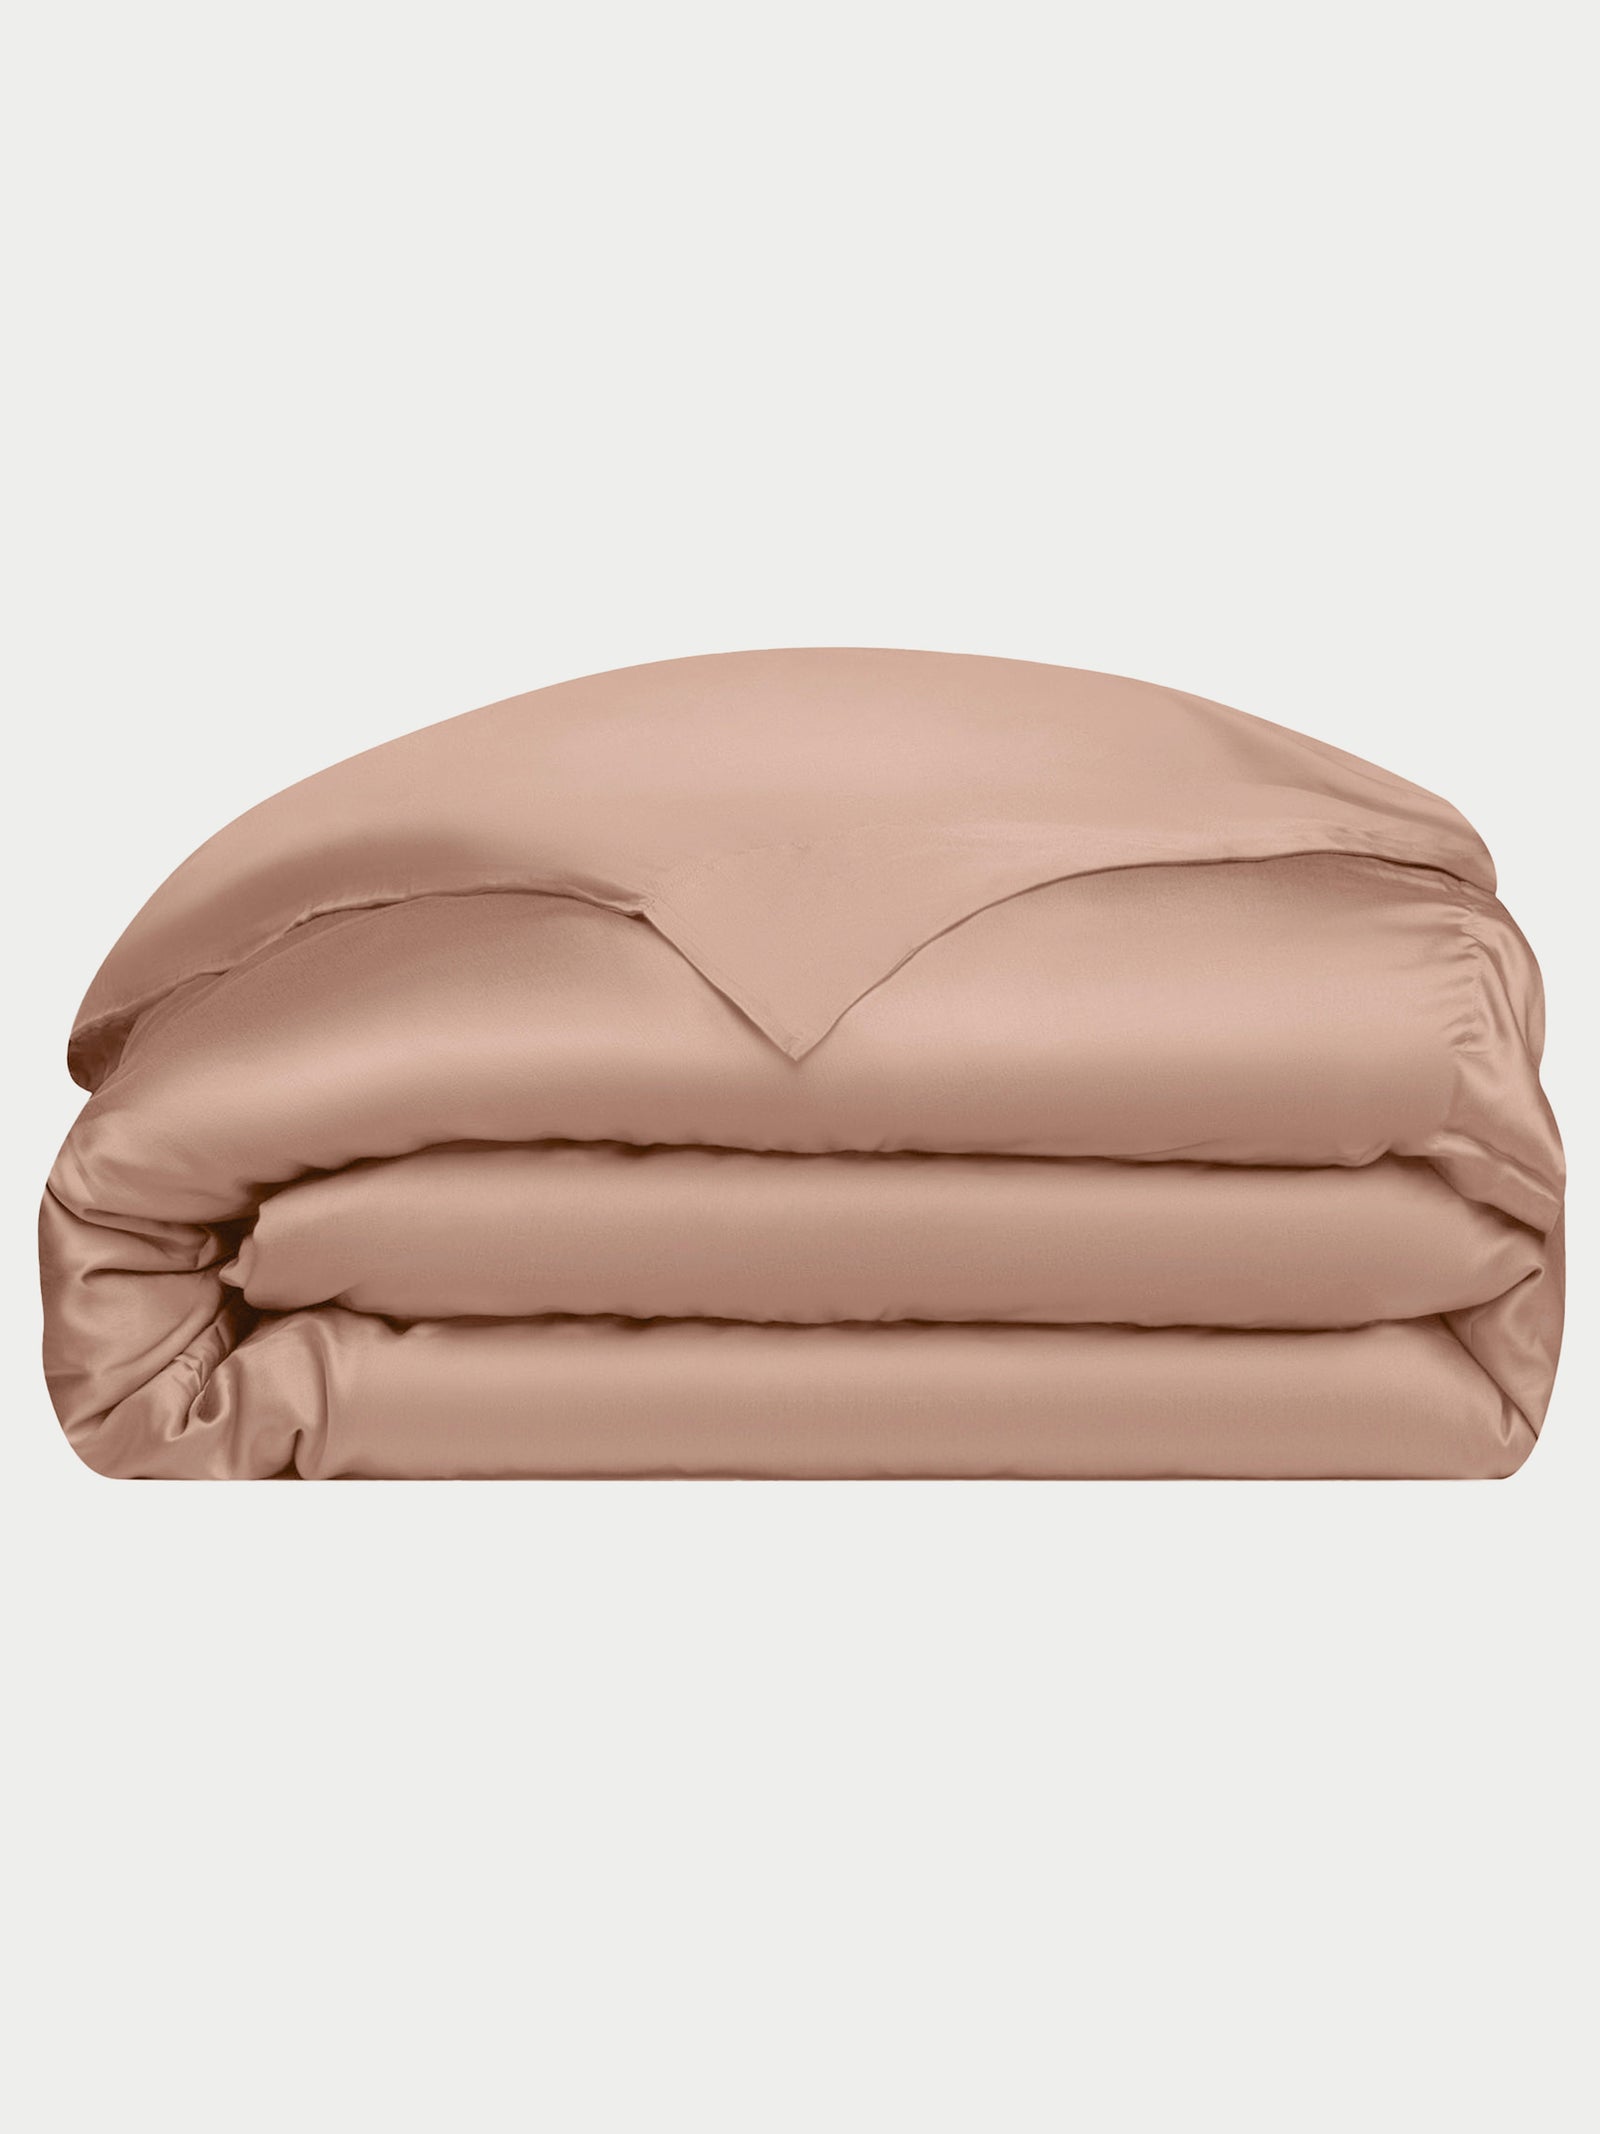 Clay duvet cover folded with white background 